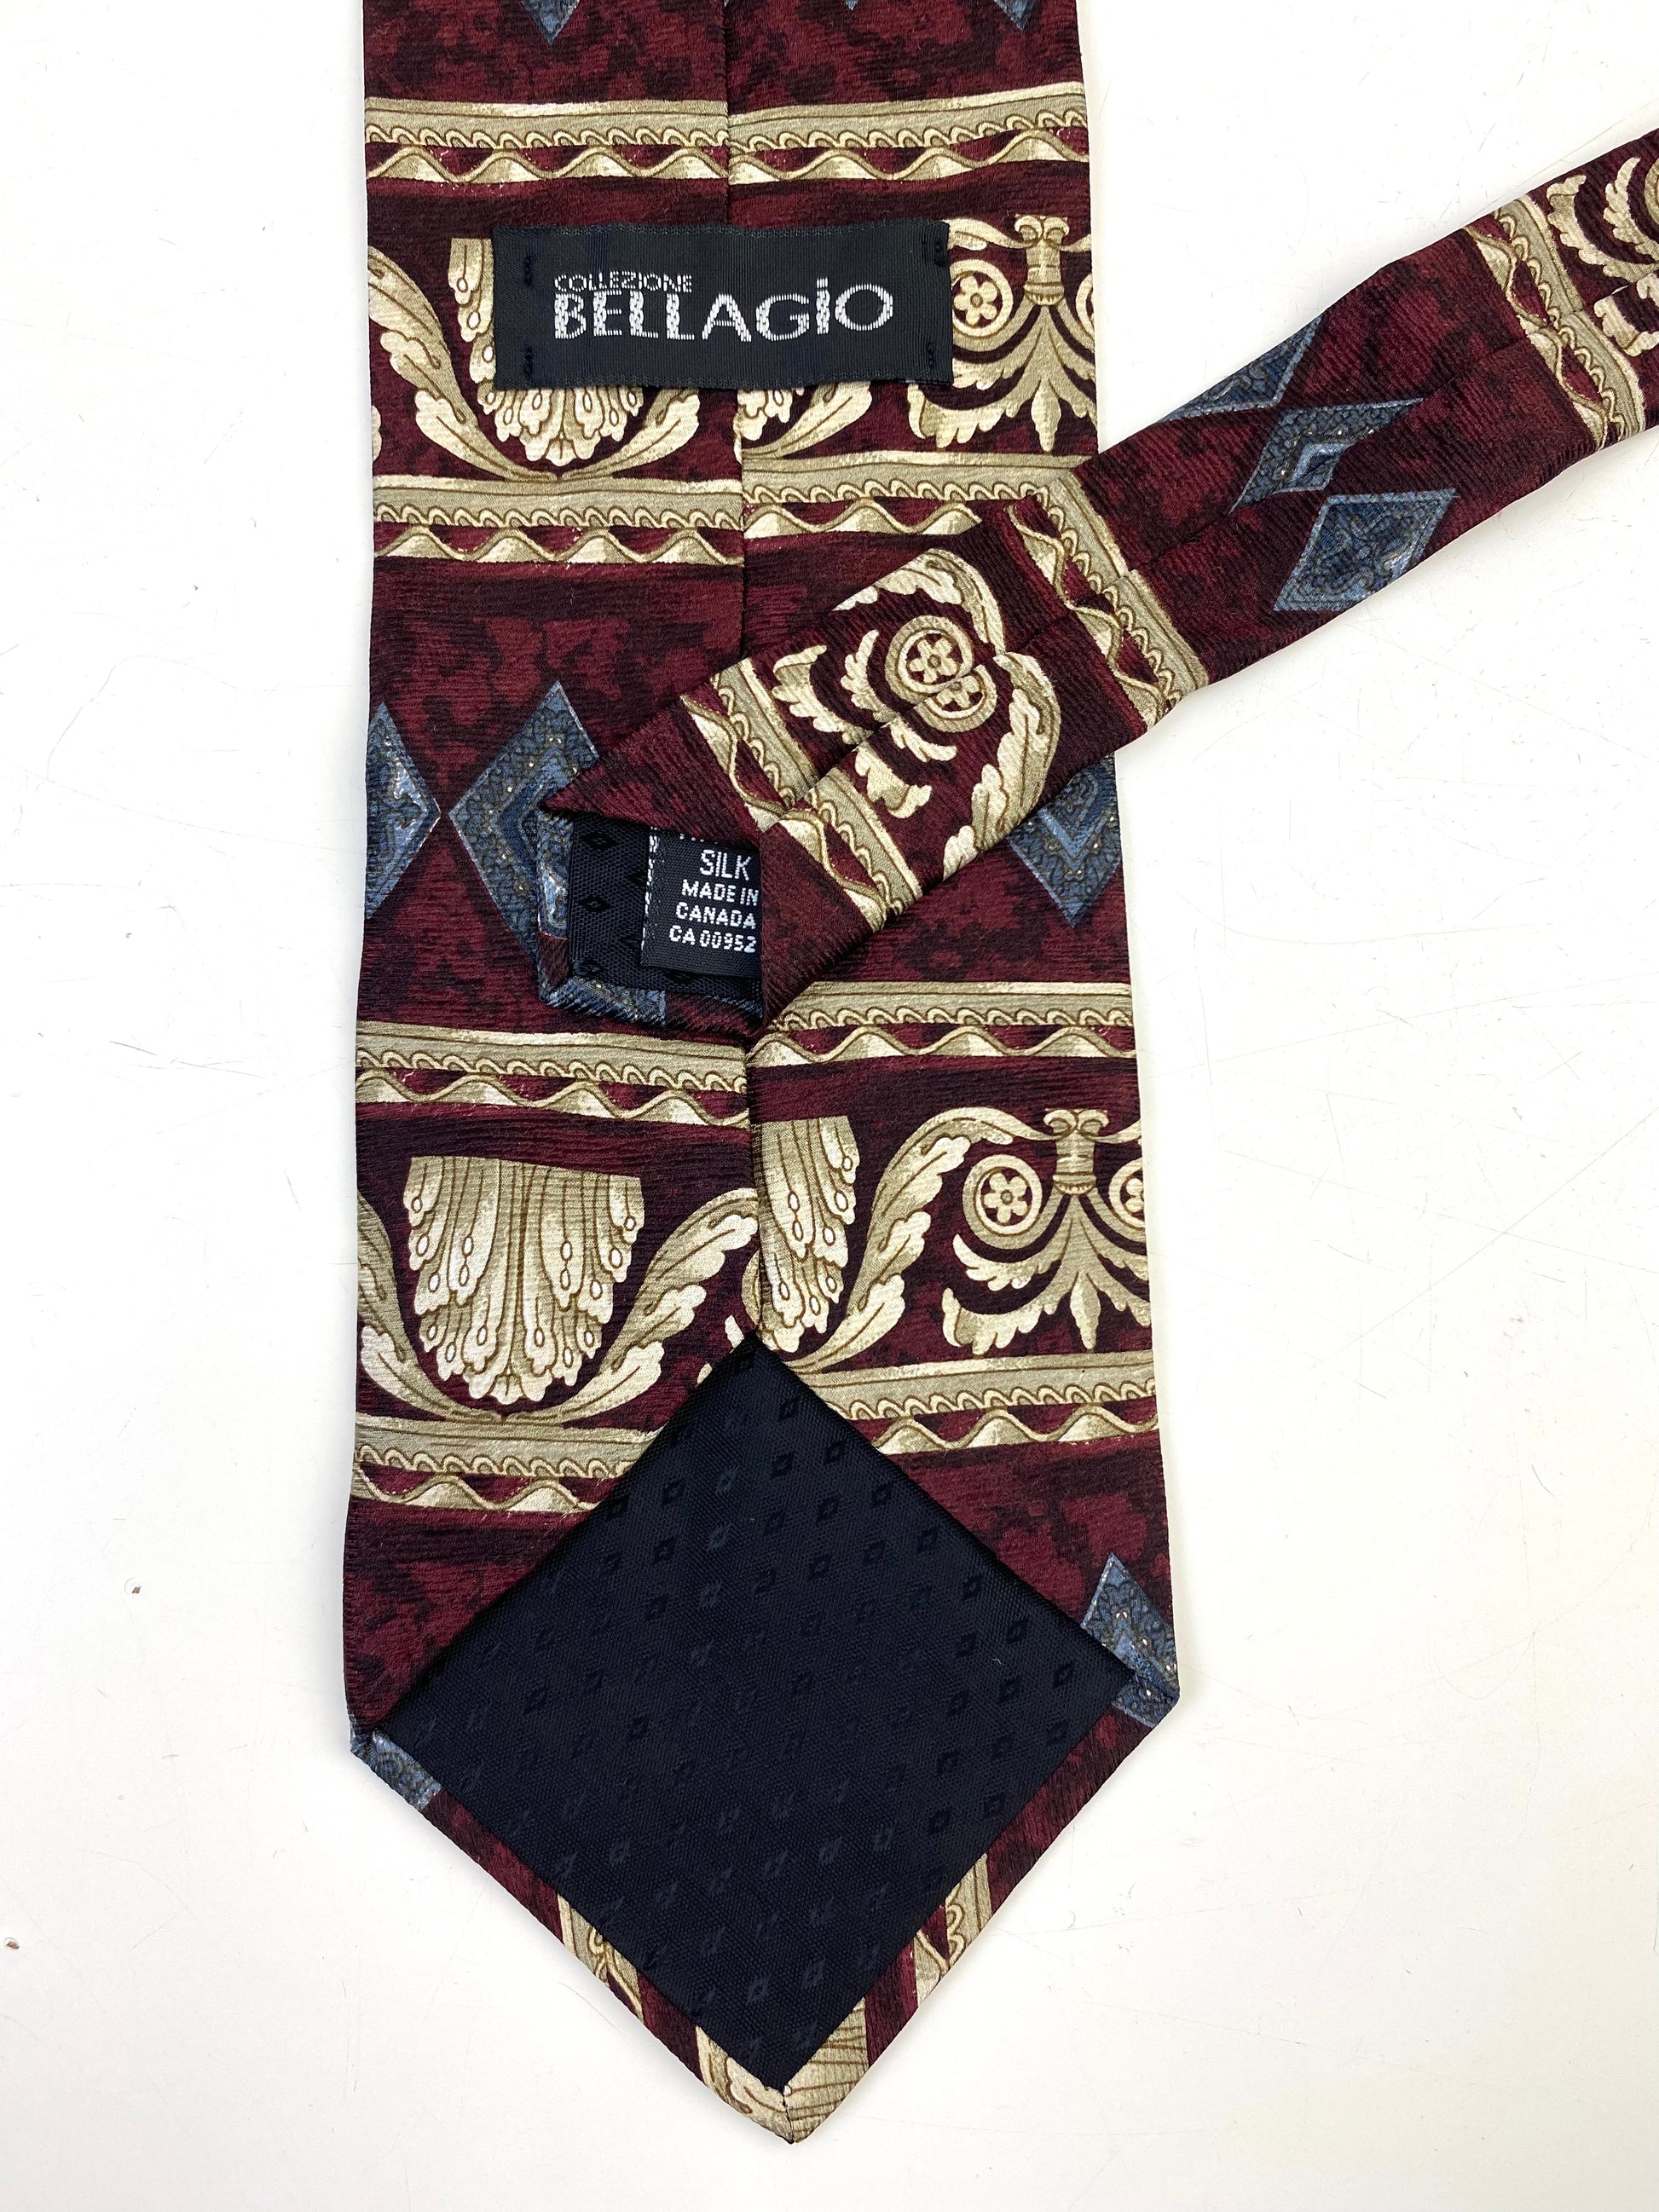 Back and labels of: 90s Deadstock Silk Necktie, Men's Vintage Wine/ Taupe/ Blue Classical Pattern Tie, NOS